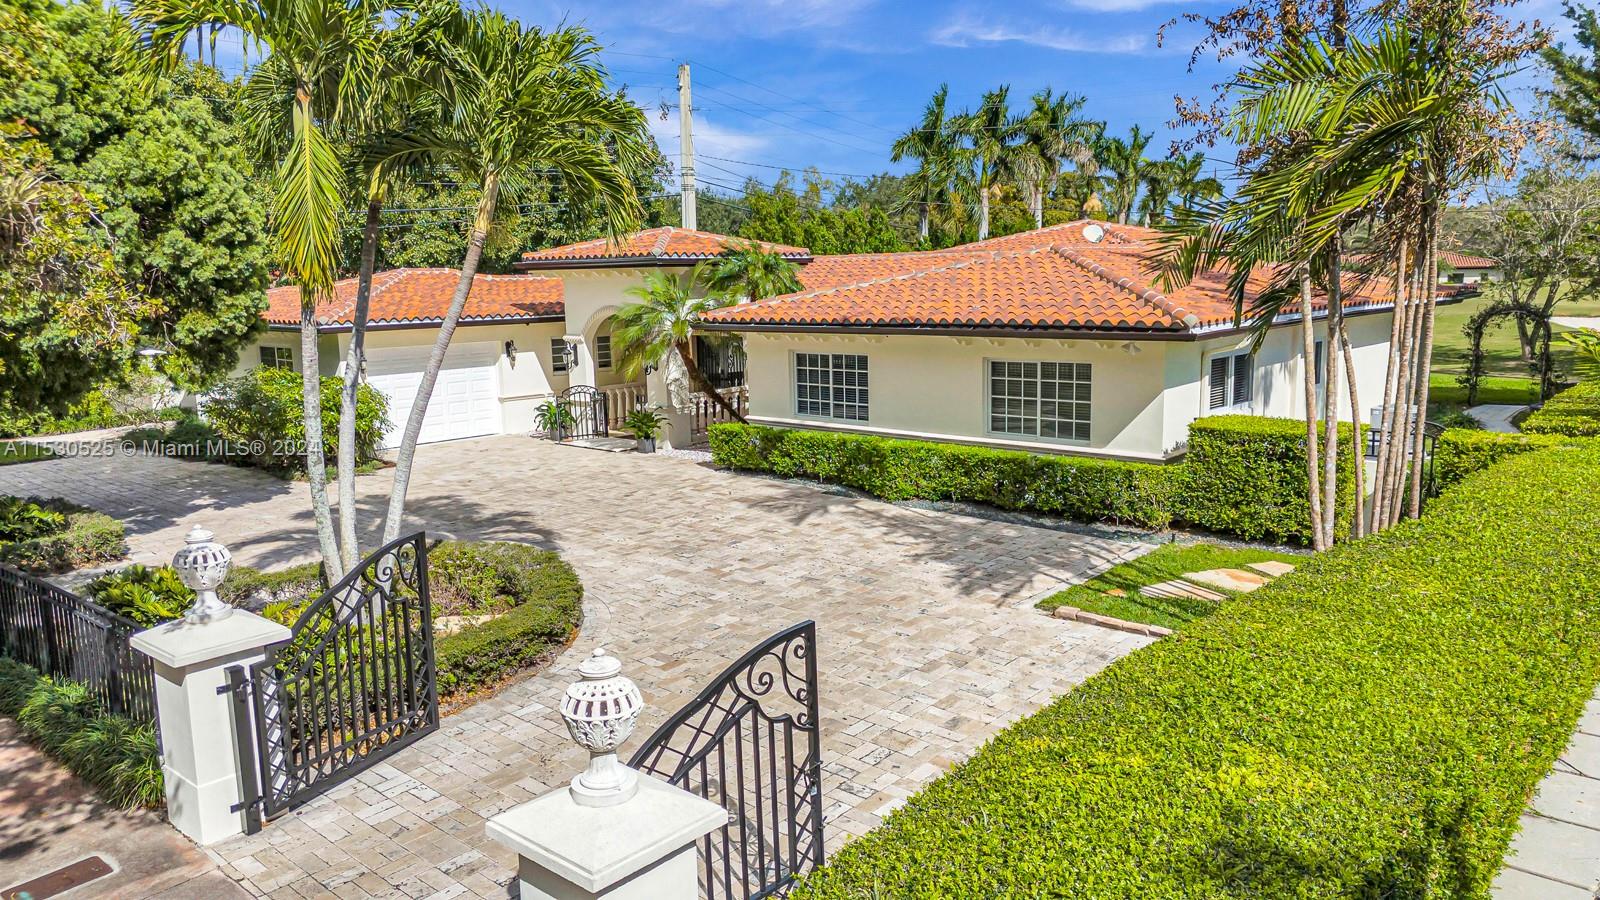 Located on the highly sought-after and coveted Santa Maria St within the City Beautiful–Coral Gables, this striking, immaculately maintained, one-story, single-family pool home offers a perfect blend of traditional elegance, functionality and style. Ideally situated on hole 3 of the exclusive Riviera Country Club, this residence offers 5 bedrooms and 4 bathrooms over an expansive 3,884 sf of living space.  Features include high impact windows and doors, S.S. appliances, saltwater pool system with heater, marble flooring, wood floors in the bedrooms and plenty of closet space. The generously sized backyard oasis is perfect for hosting family BBQs or for your morning cup of coffee while taking in the breathtaking golf course views.